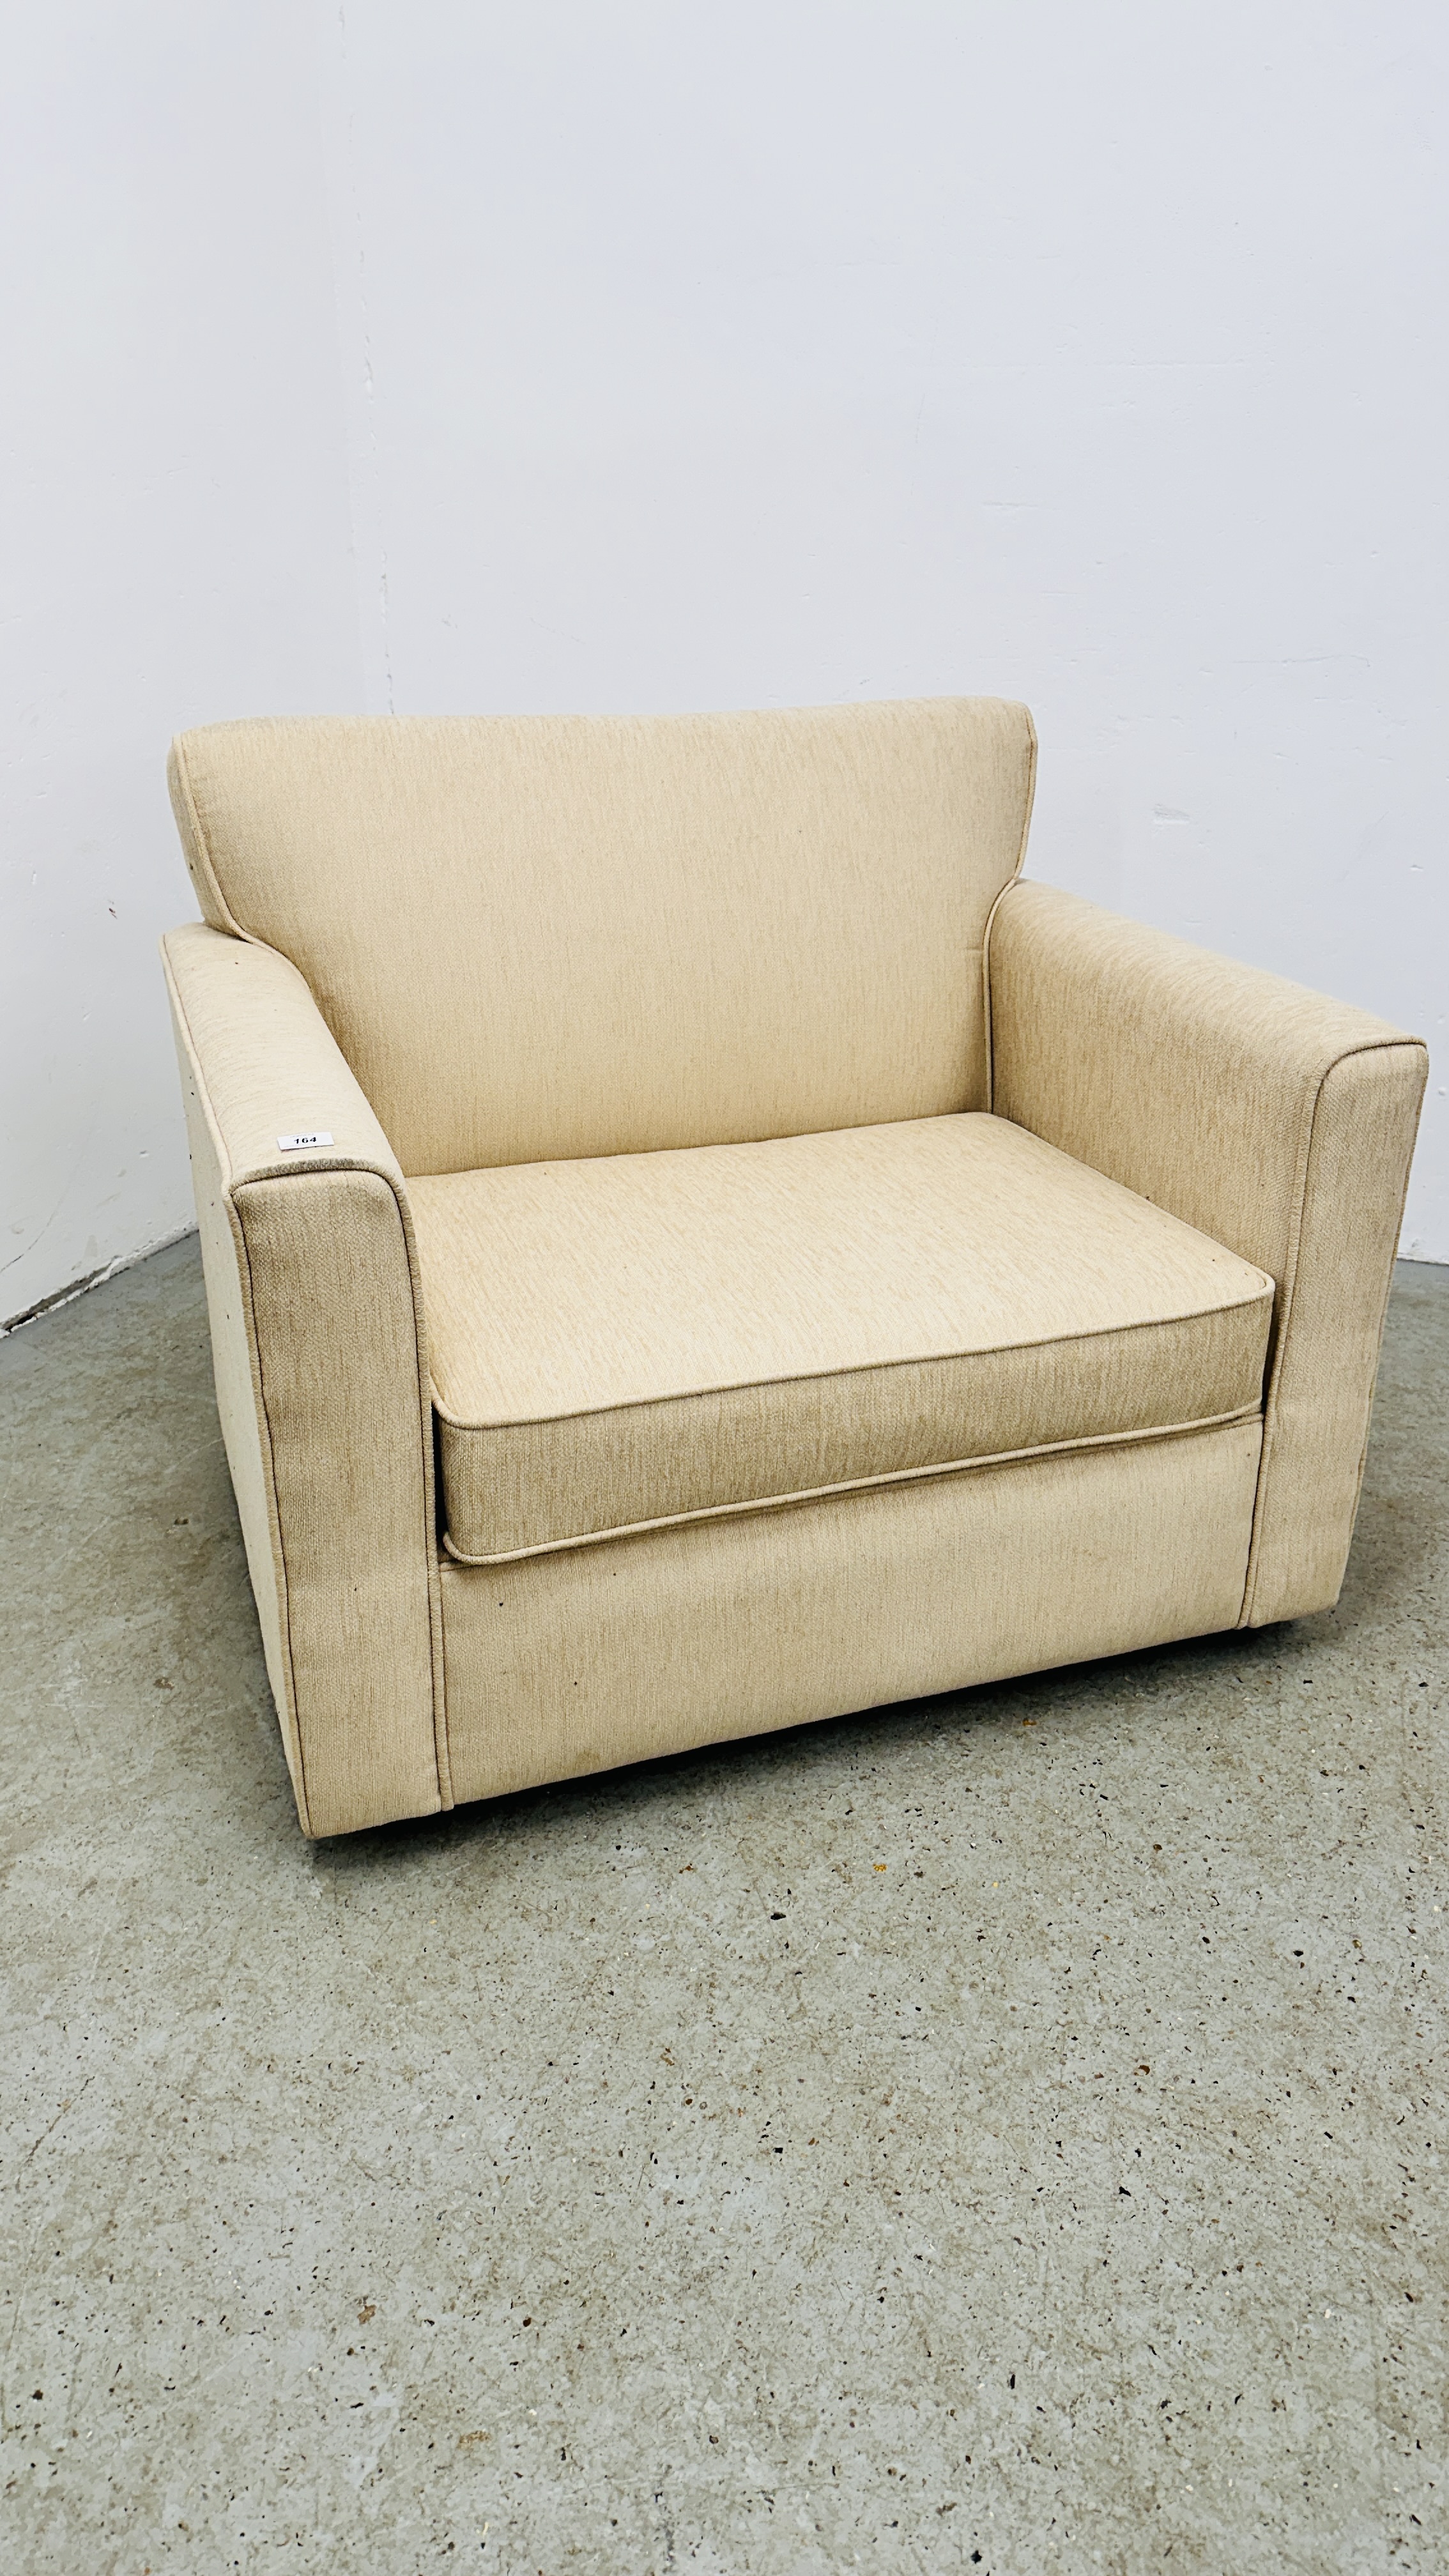 CREAM UPHOLSTERED ARM CHAIR / SOFA BED.